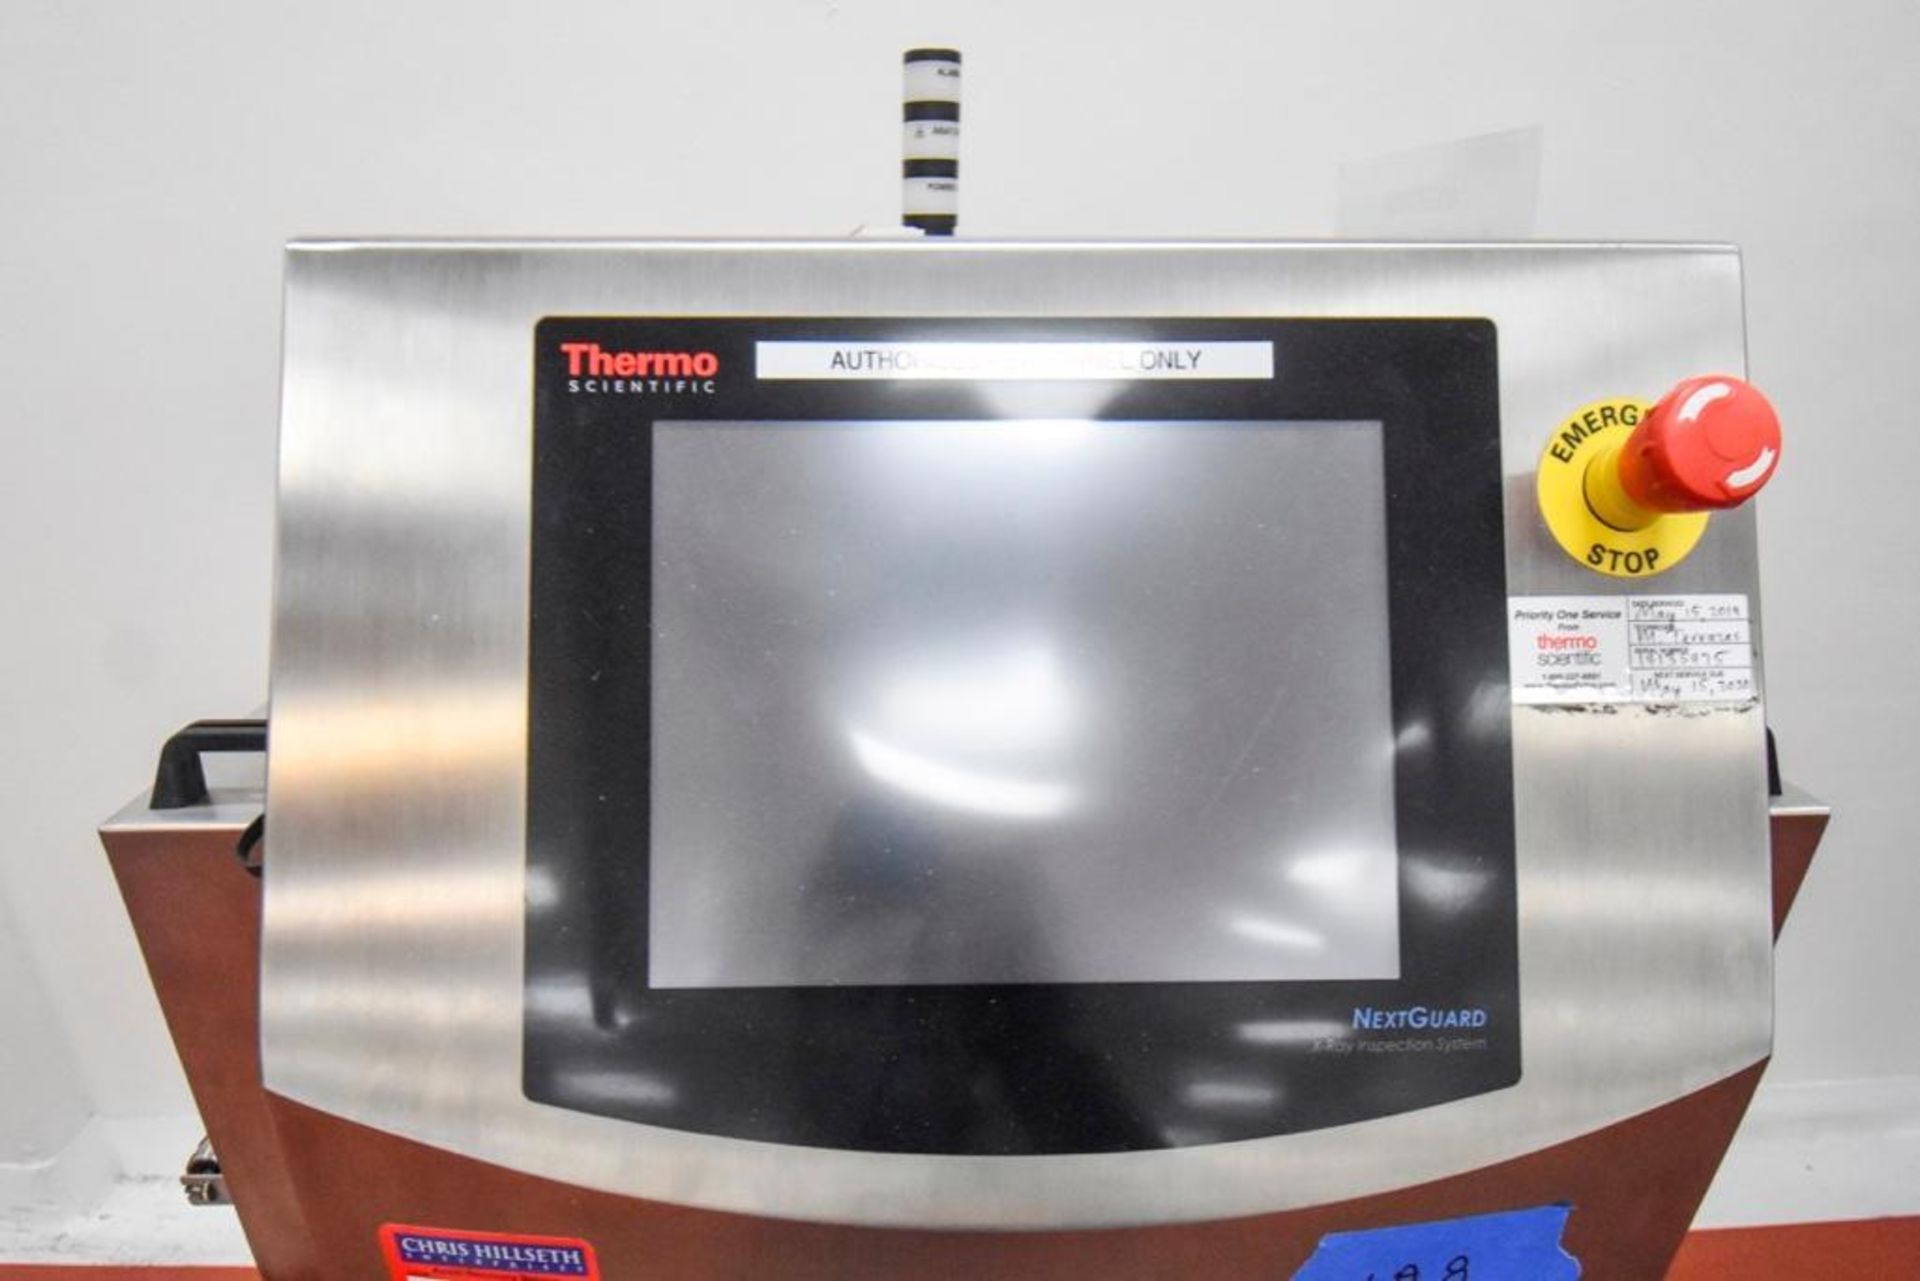 Thermo Scientific Next Guard X-ray Inspection system - Image 2 of 13